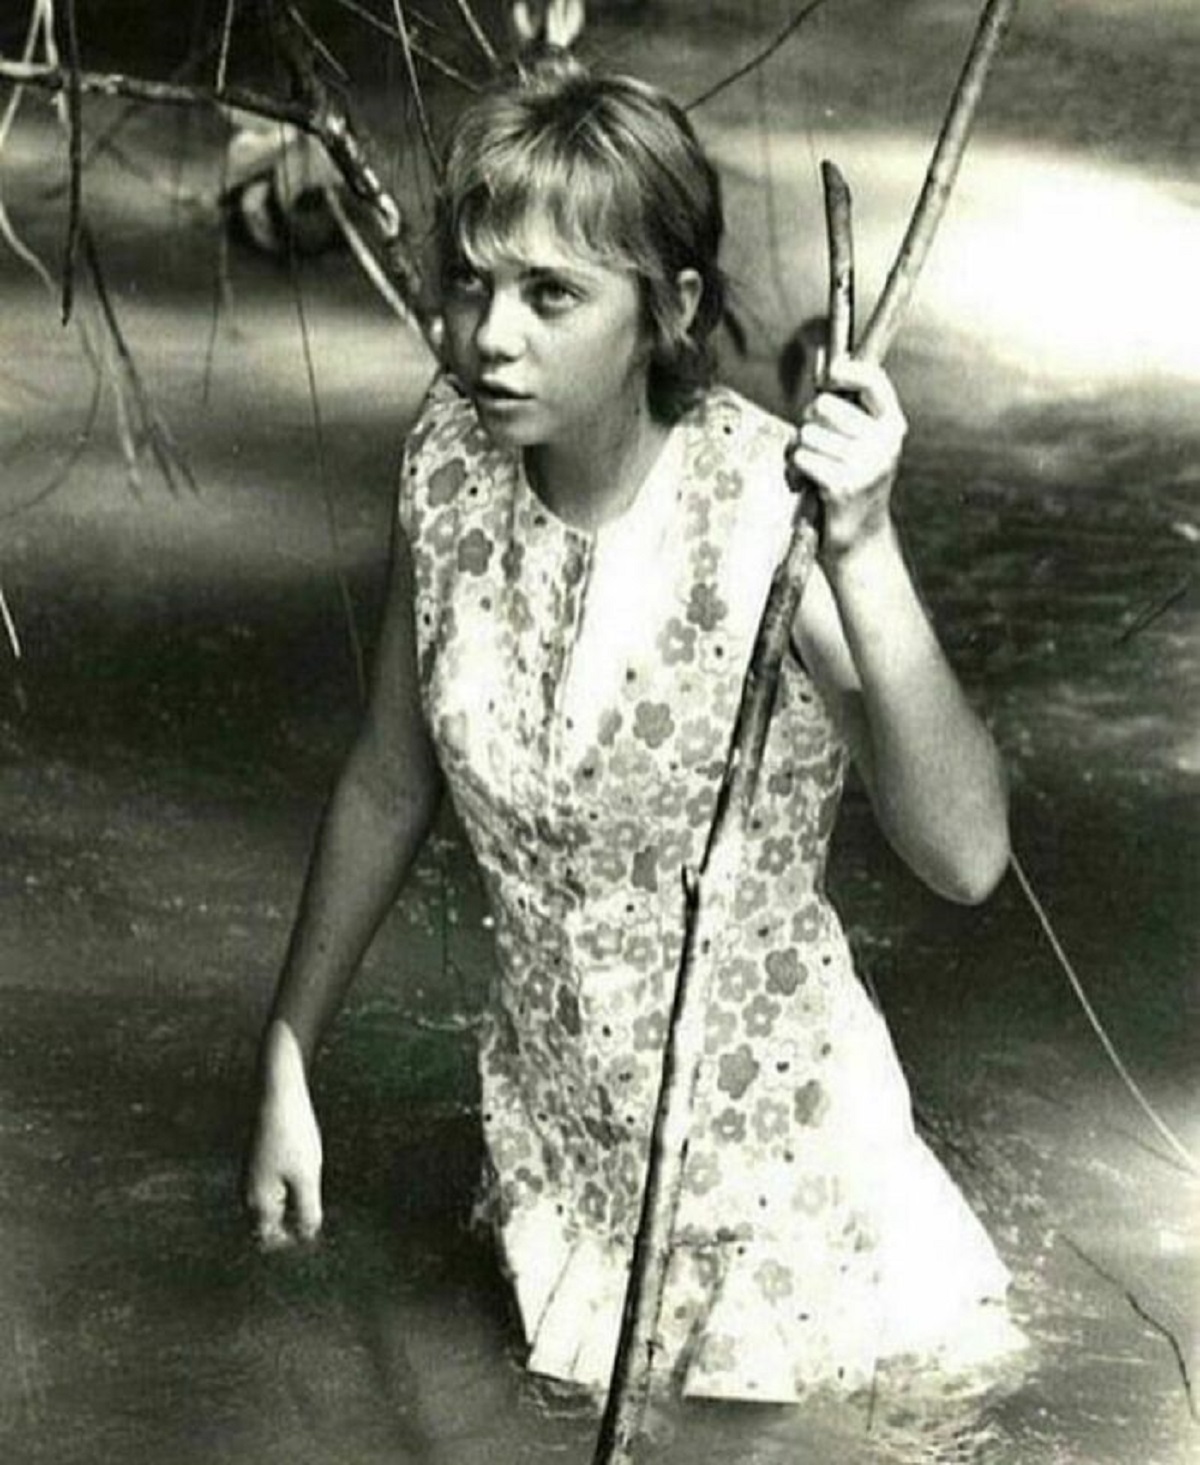 17 Year Old Juliane Koepcke Survived The Lansa Flight 508 Plane Crash In 1971. After The Plane Was Struck By Lightning, She Was Sucked Out And Fell 2 Miles Still Strapped To Her Seat. She Survived The Next 11 Days Alone In The Amazon Jungle